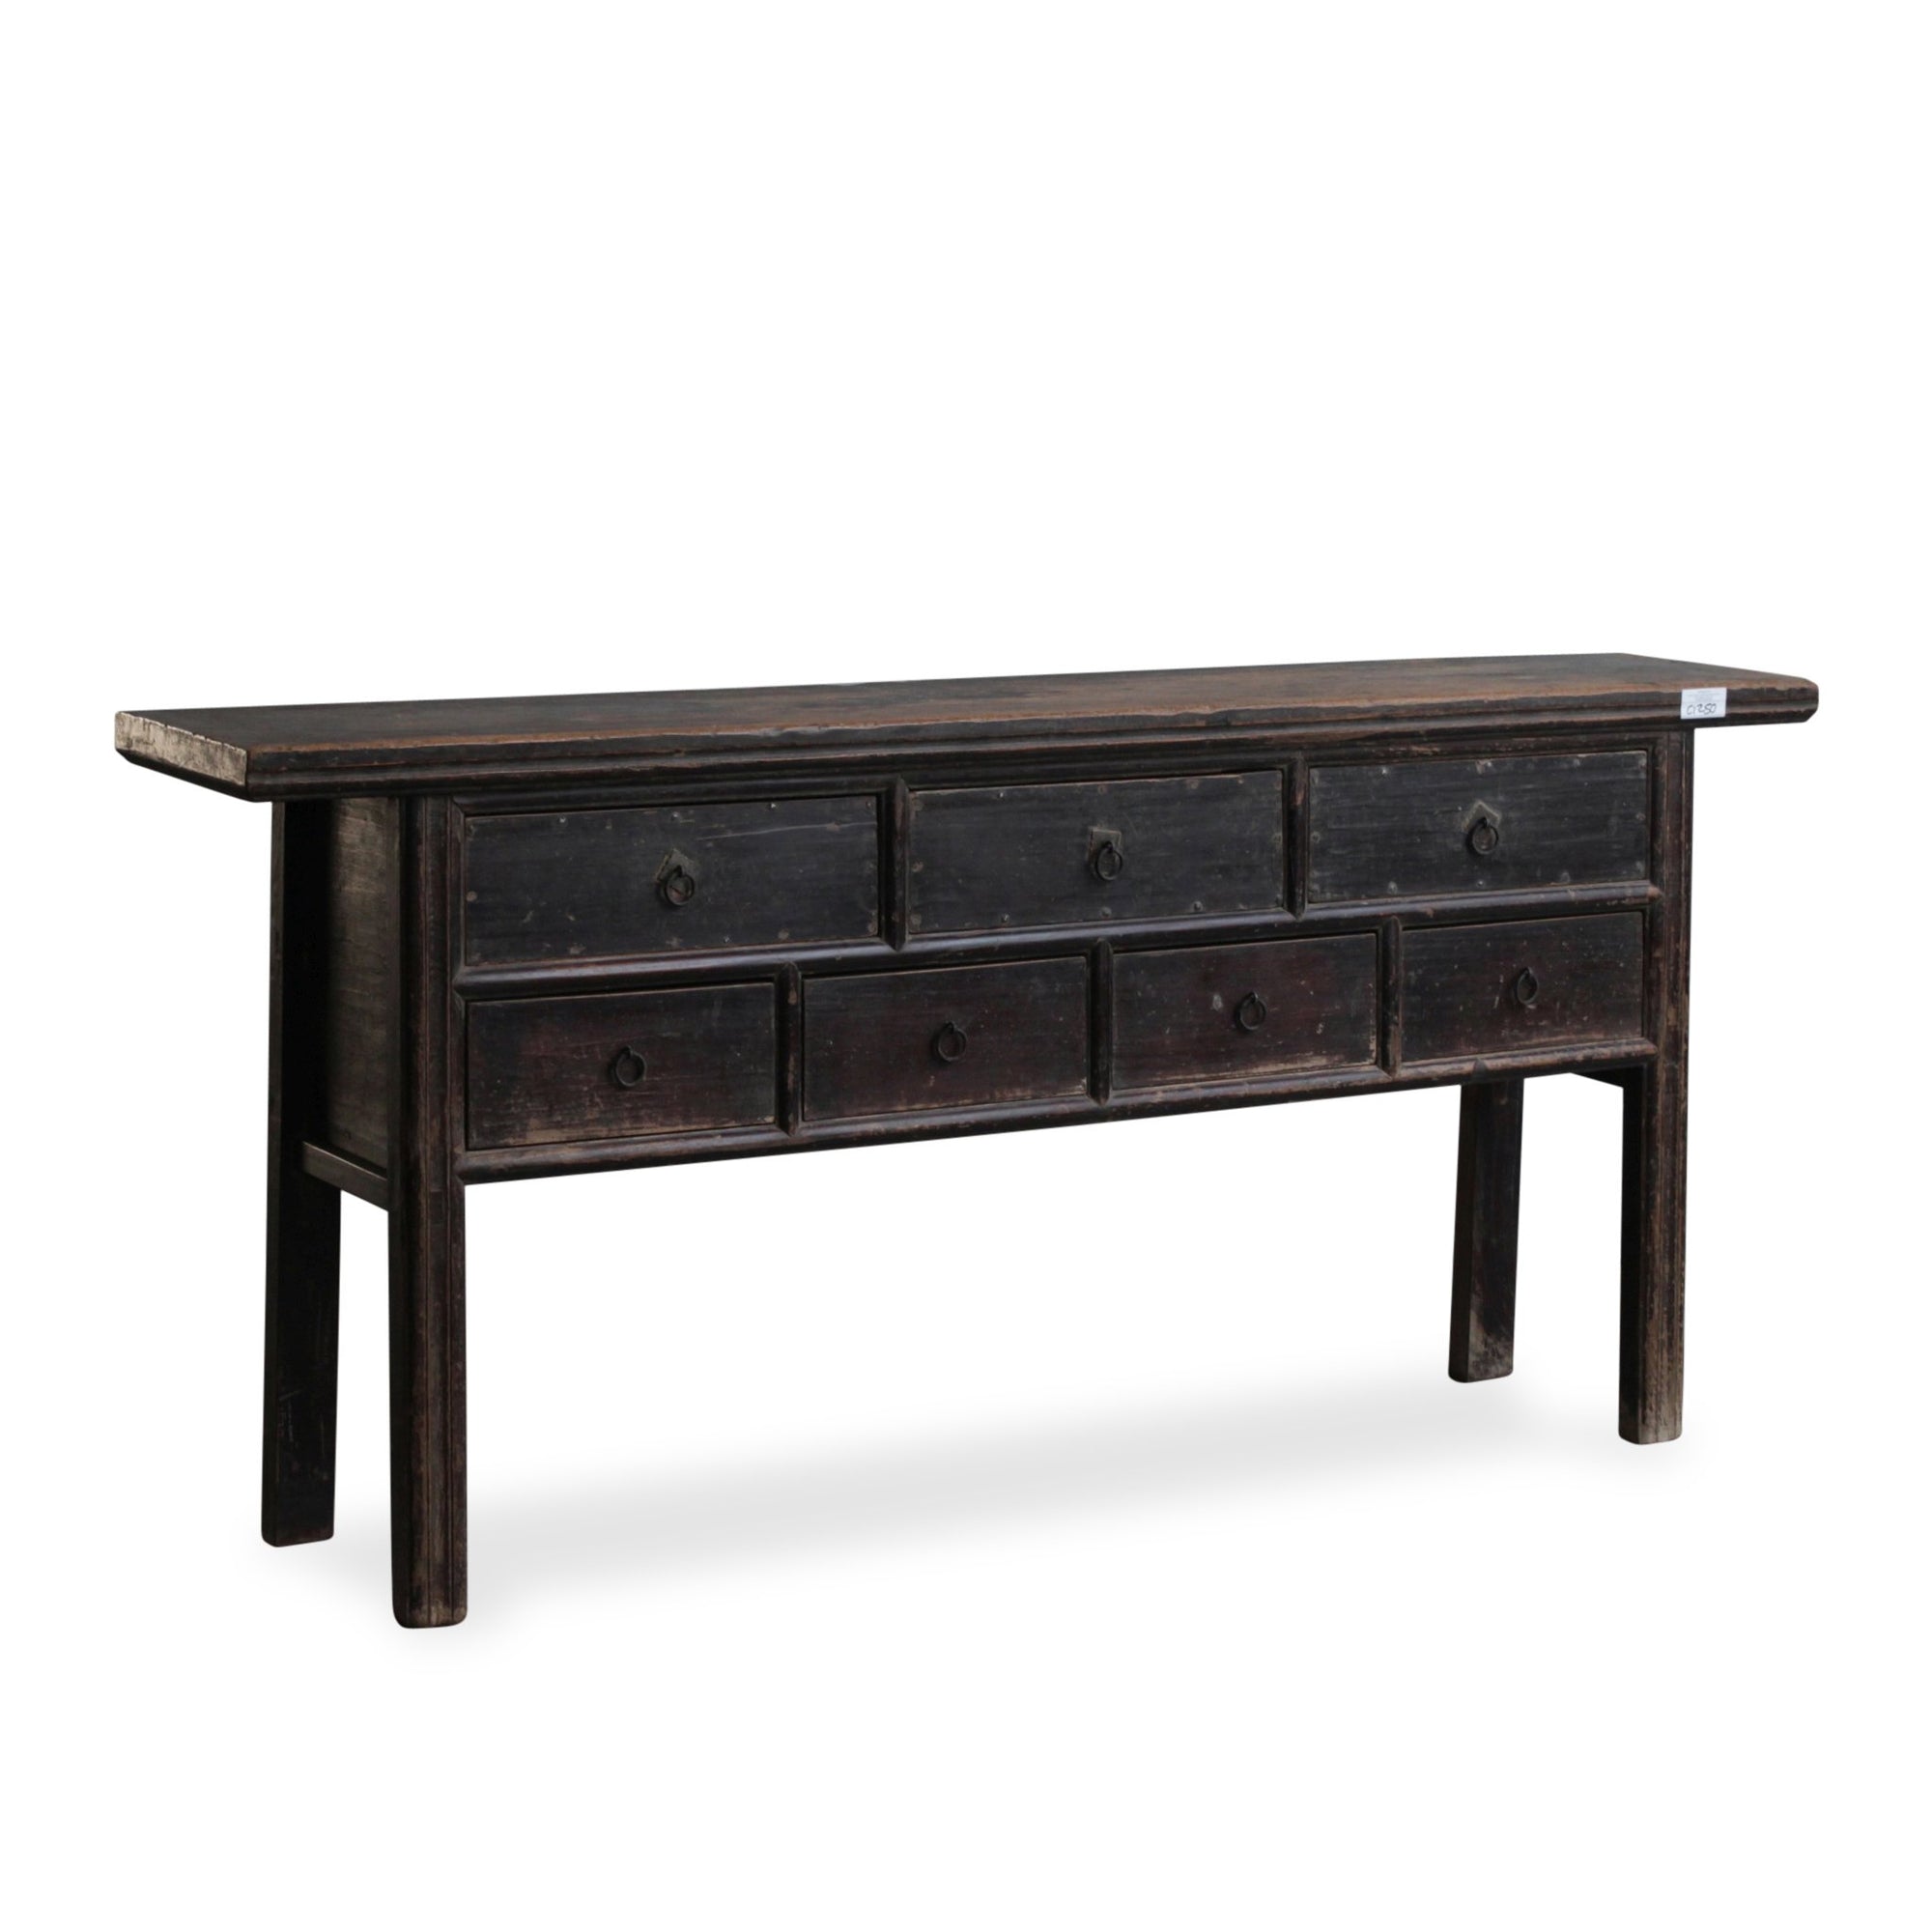 Console Table With 7 Drawers - Elm Wood - 19thC - 191 x 37 x 88 (wxdxh cms) - C1250